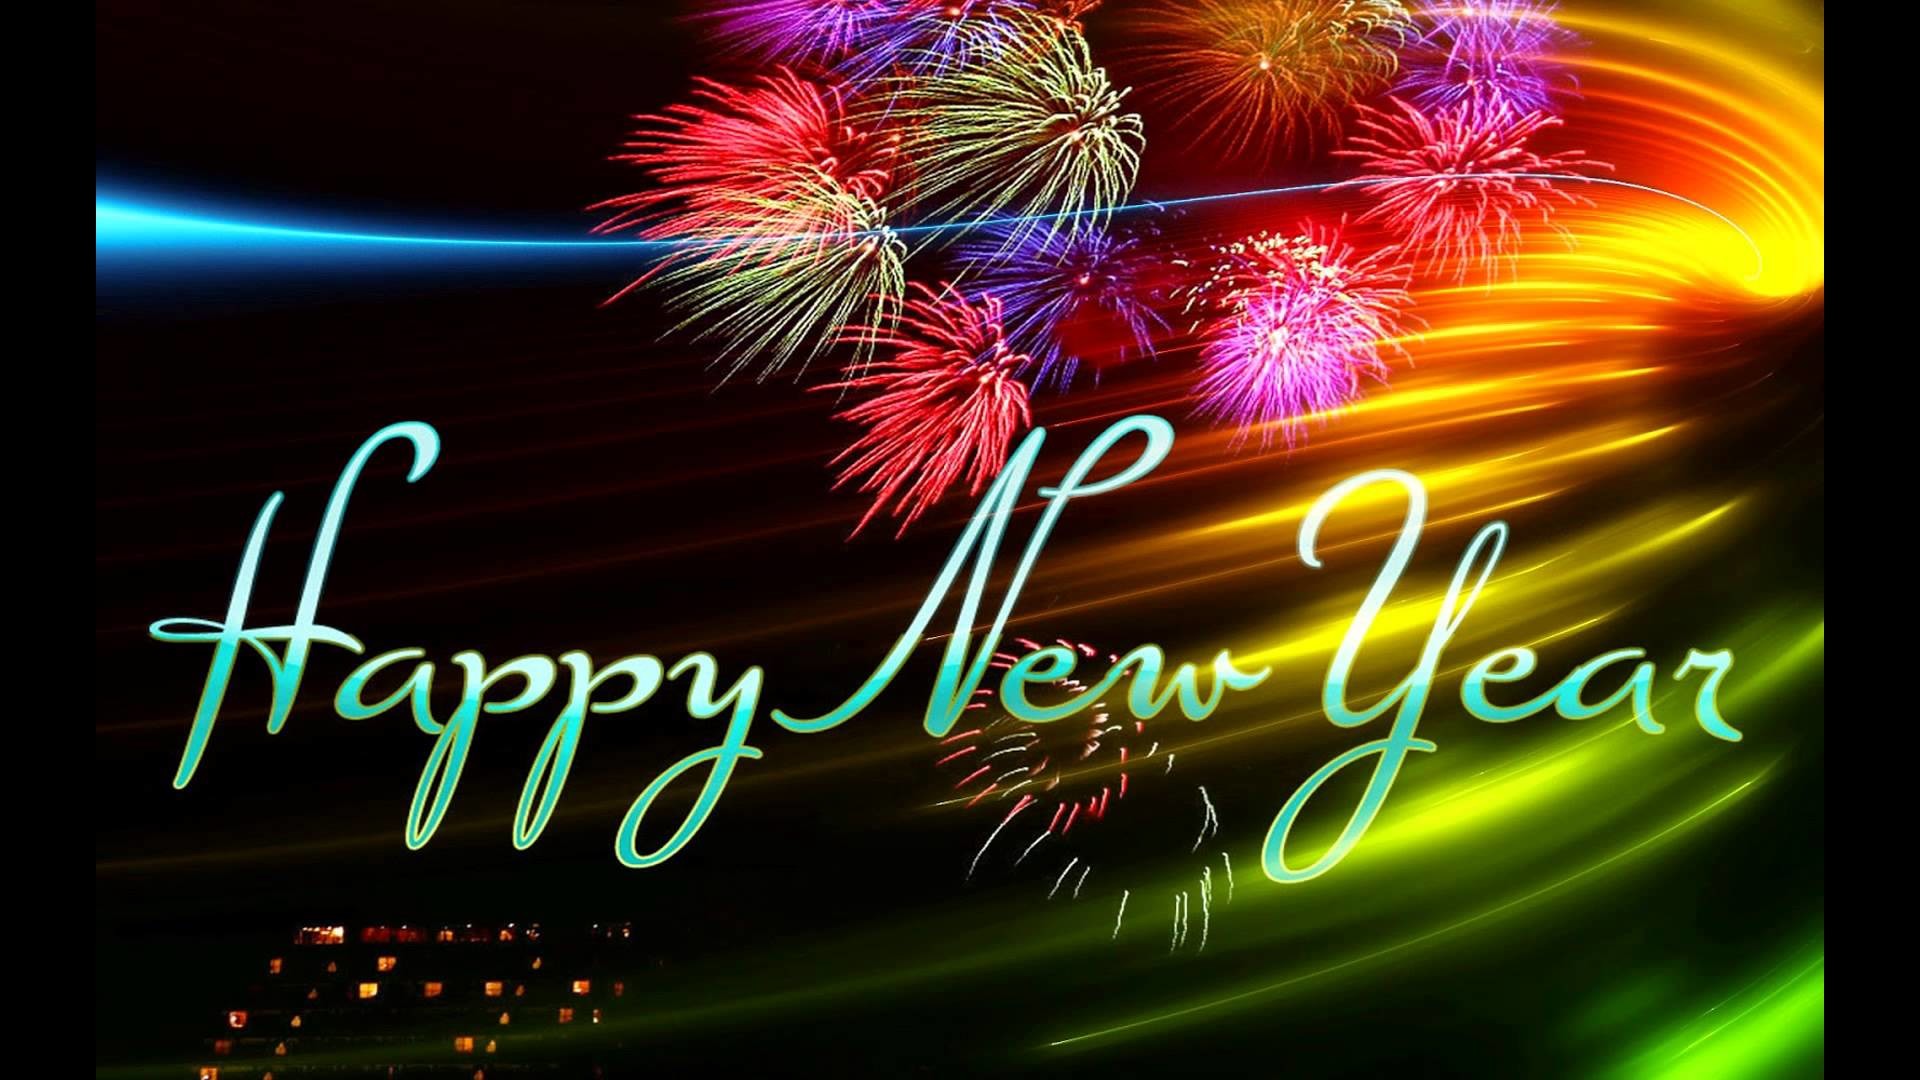 1920x1080 Advance Happy New Year 2016 Images Quotes SMS Messages Wishes Greetings  Fireworks